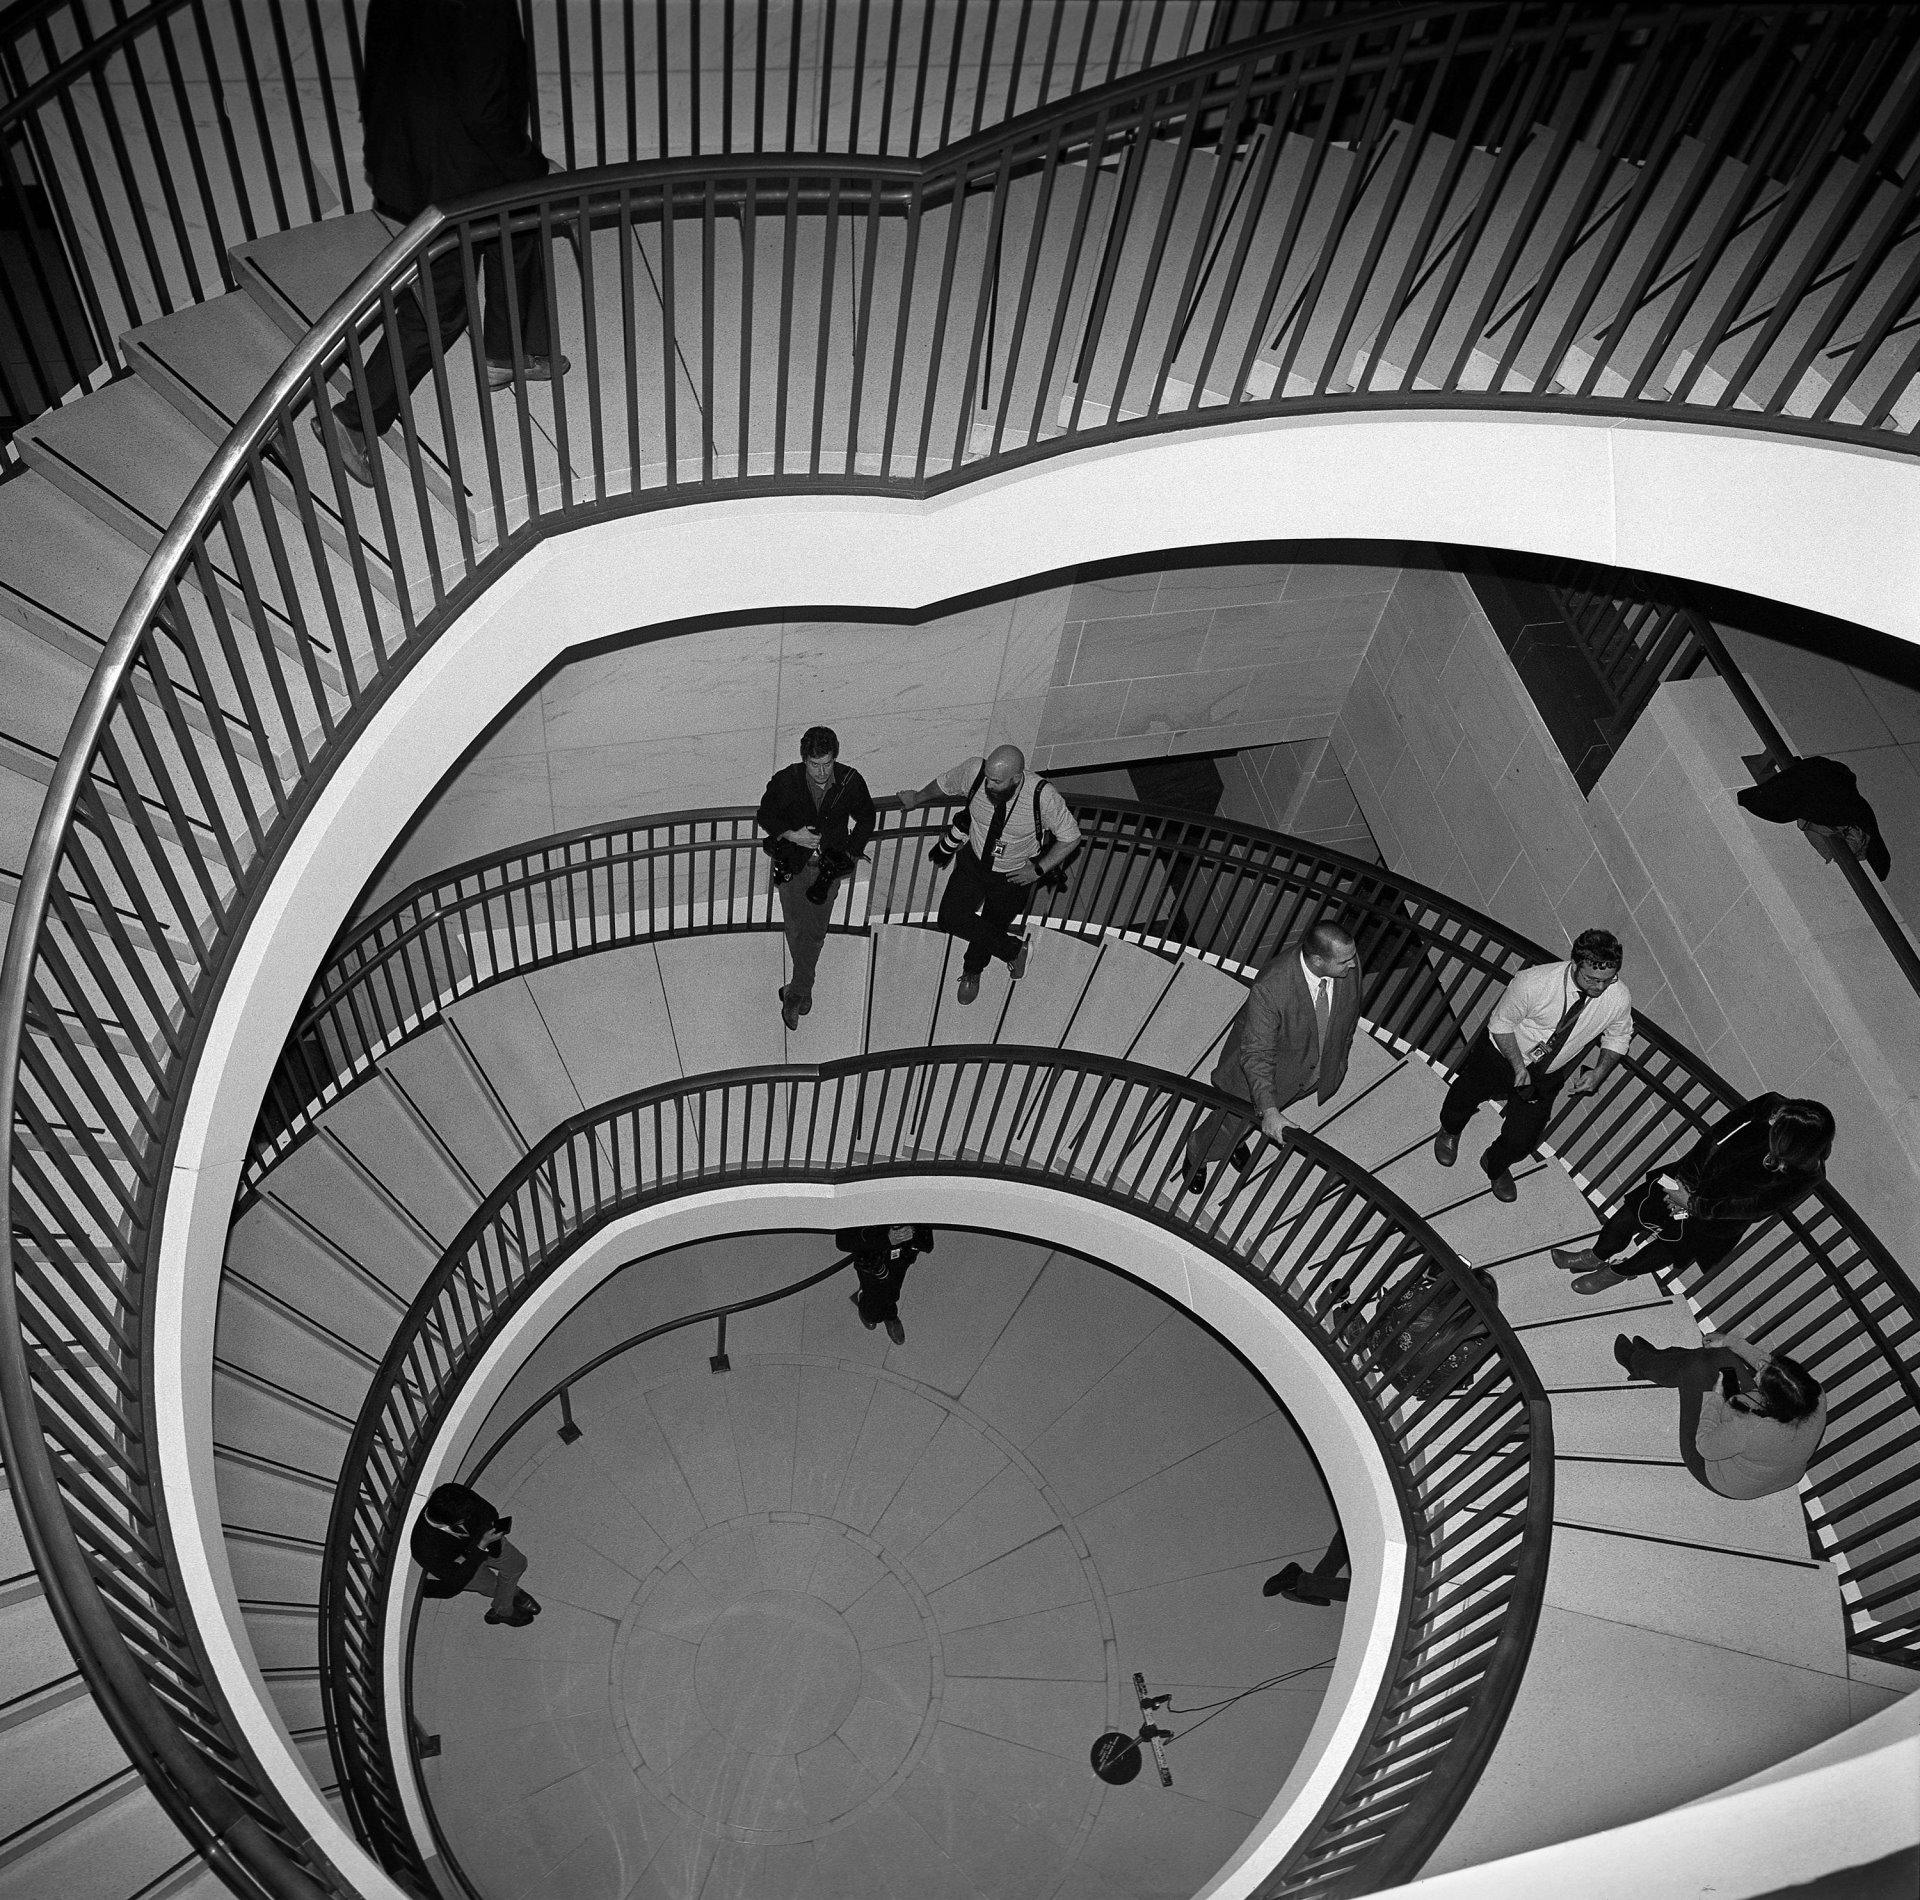 Journalists wait on a staircase that leads to the Sensitive Compartmented Information Facility, in Washington DC, USA, where the House Intelligence Committee heard from witnesses while deciding whether to impeach President Trump. Witnesses entered from the top and exited at the bottom, so journalists chased them up and down the stairs to interview and photograph them.&nbsp;